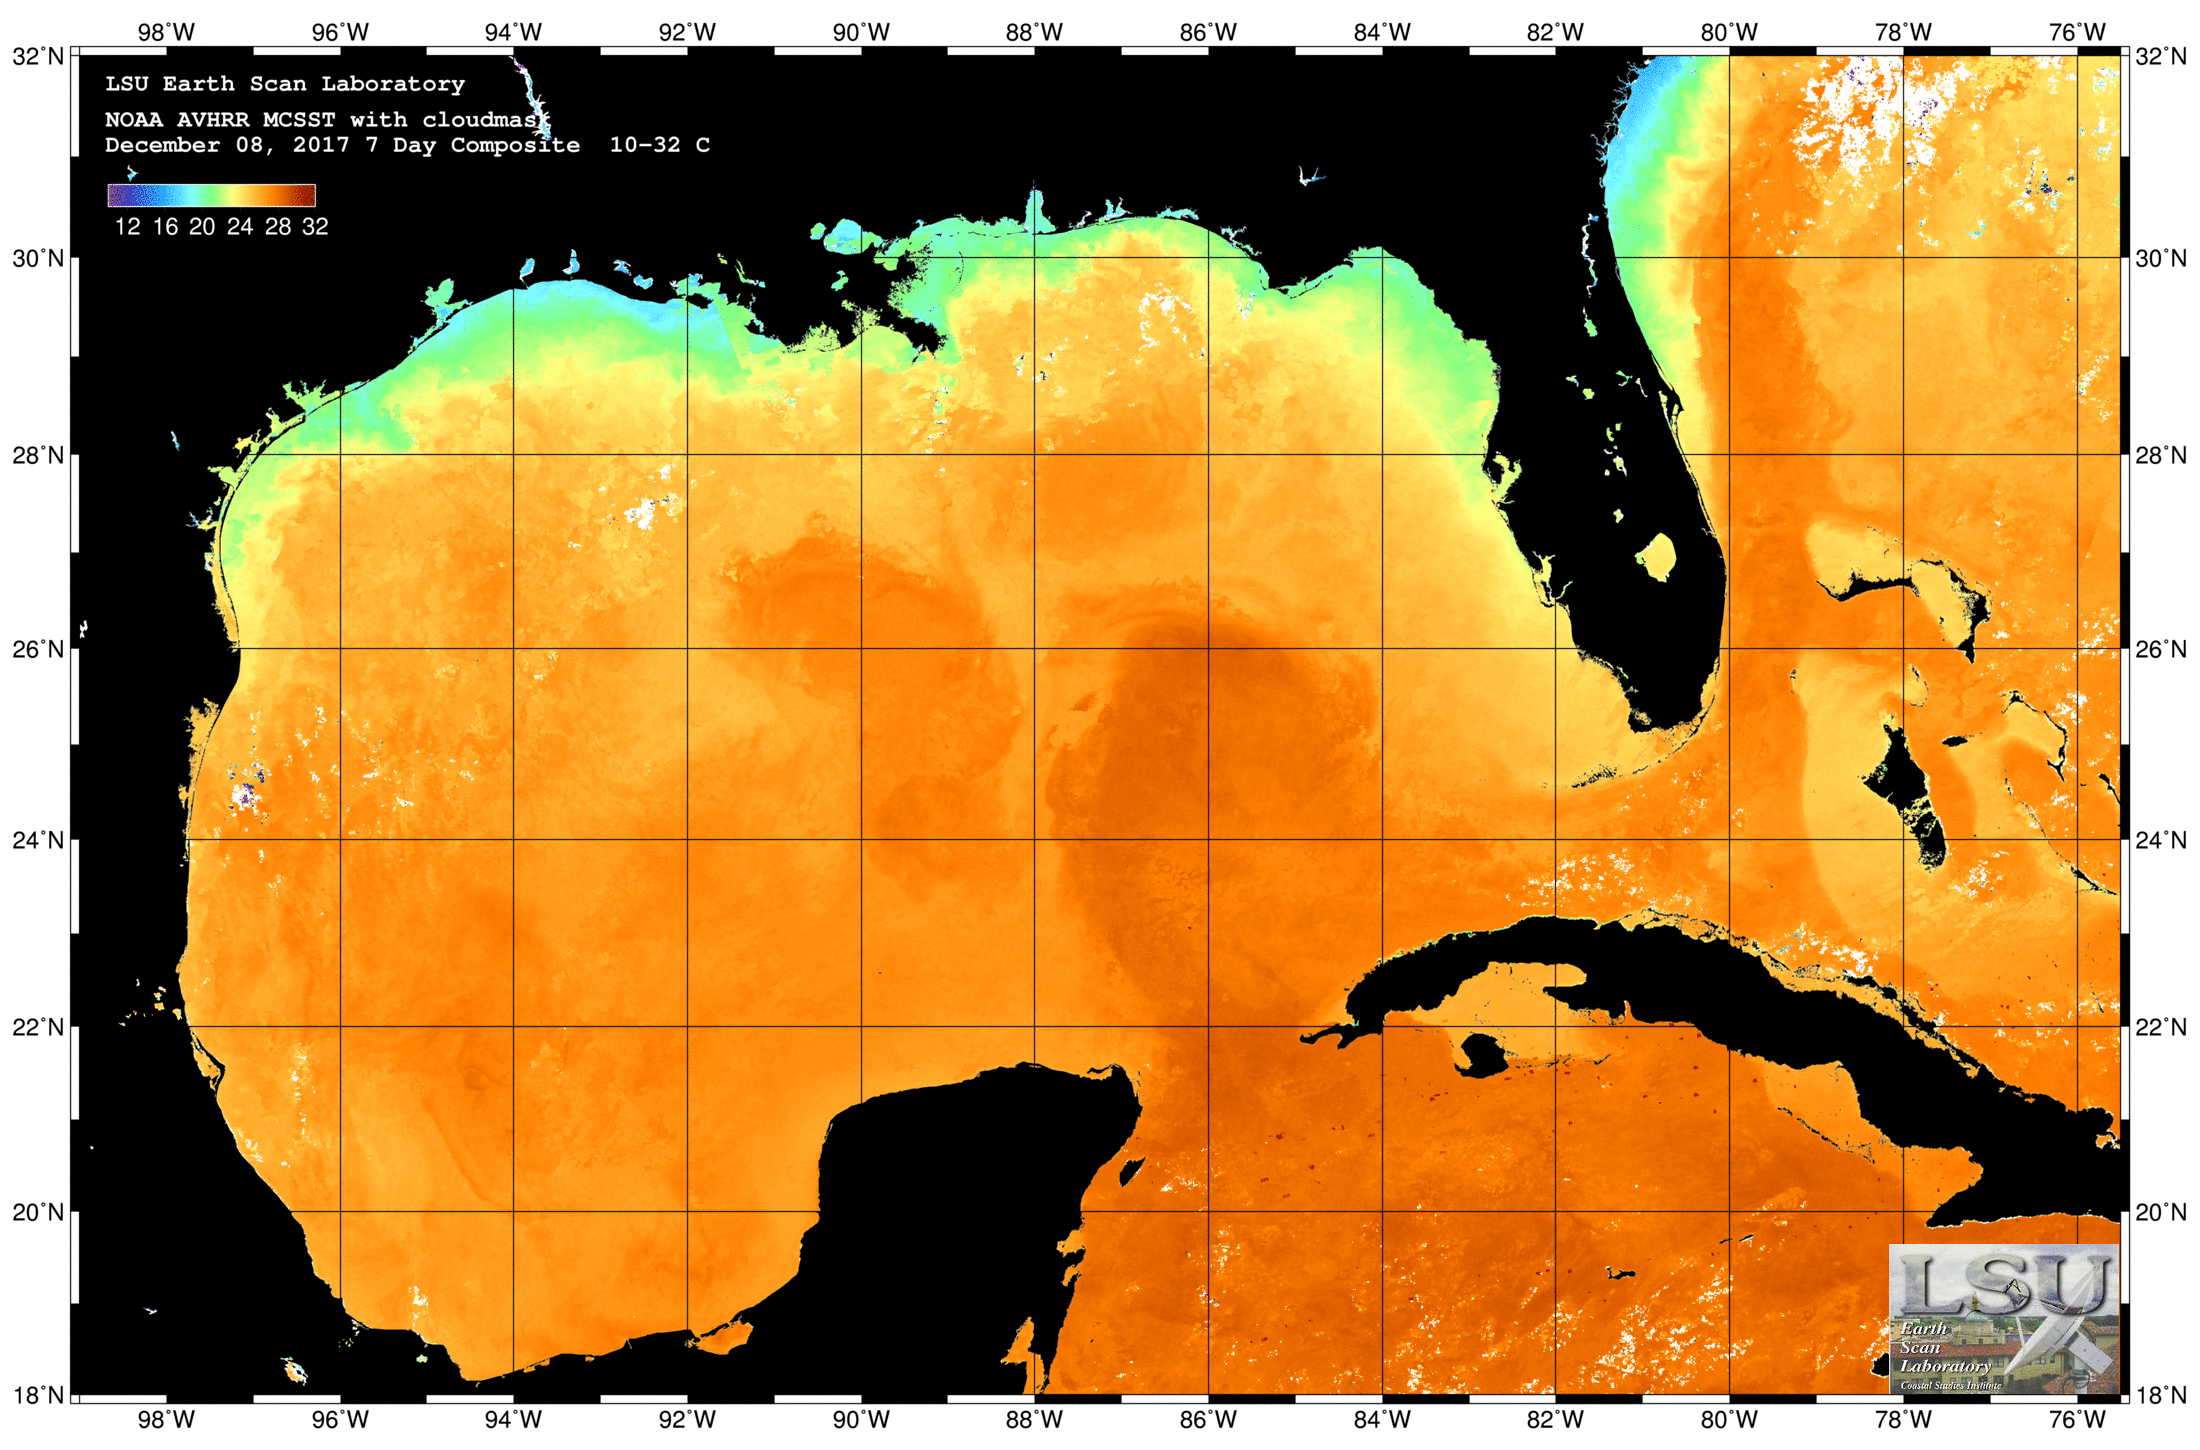 Dec 08 2017 NOAA 7-Day Composite with SSH